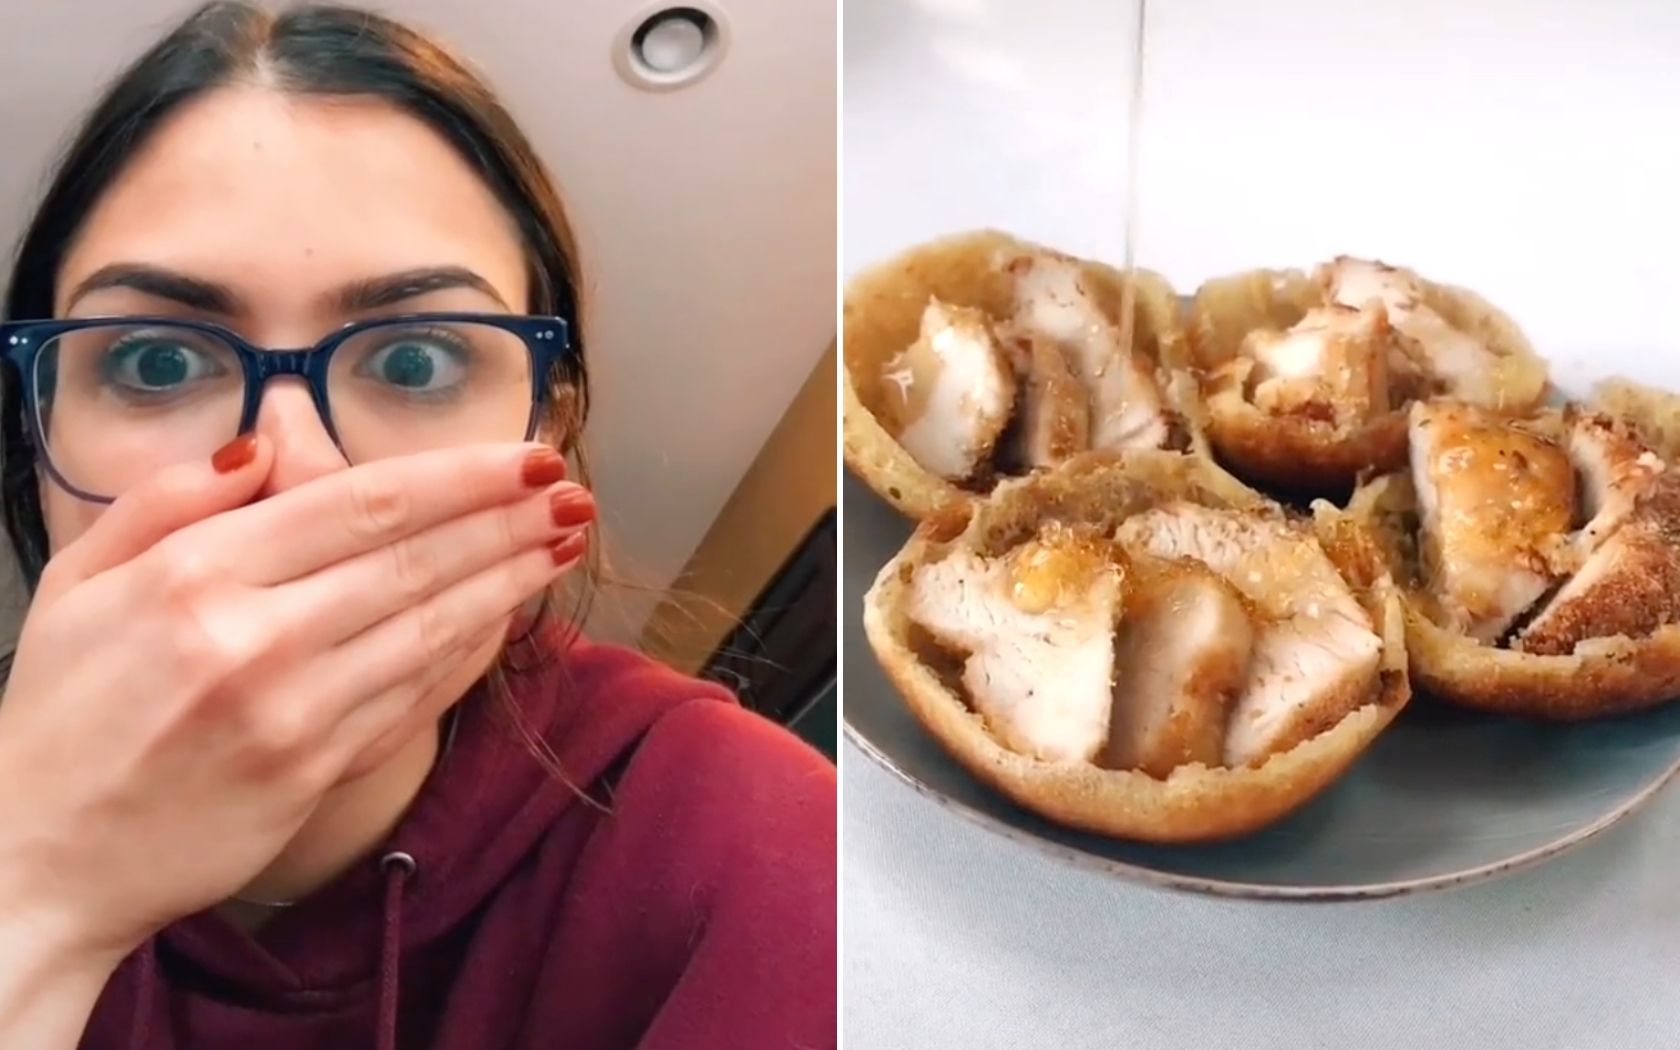 Woman shocked with hand over mouth next to little pancake batter cups of fried chicken with maple syrup from a Tiktok Hack